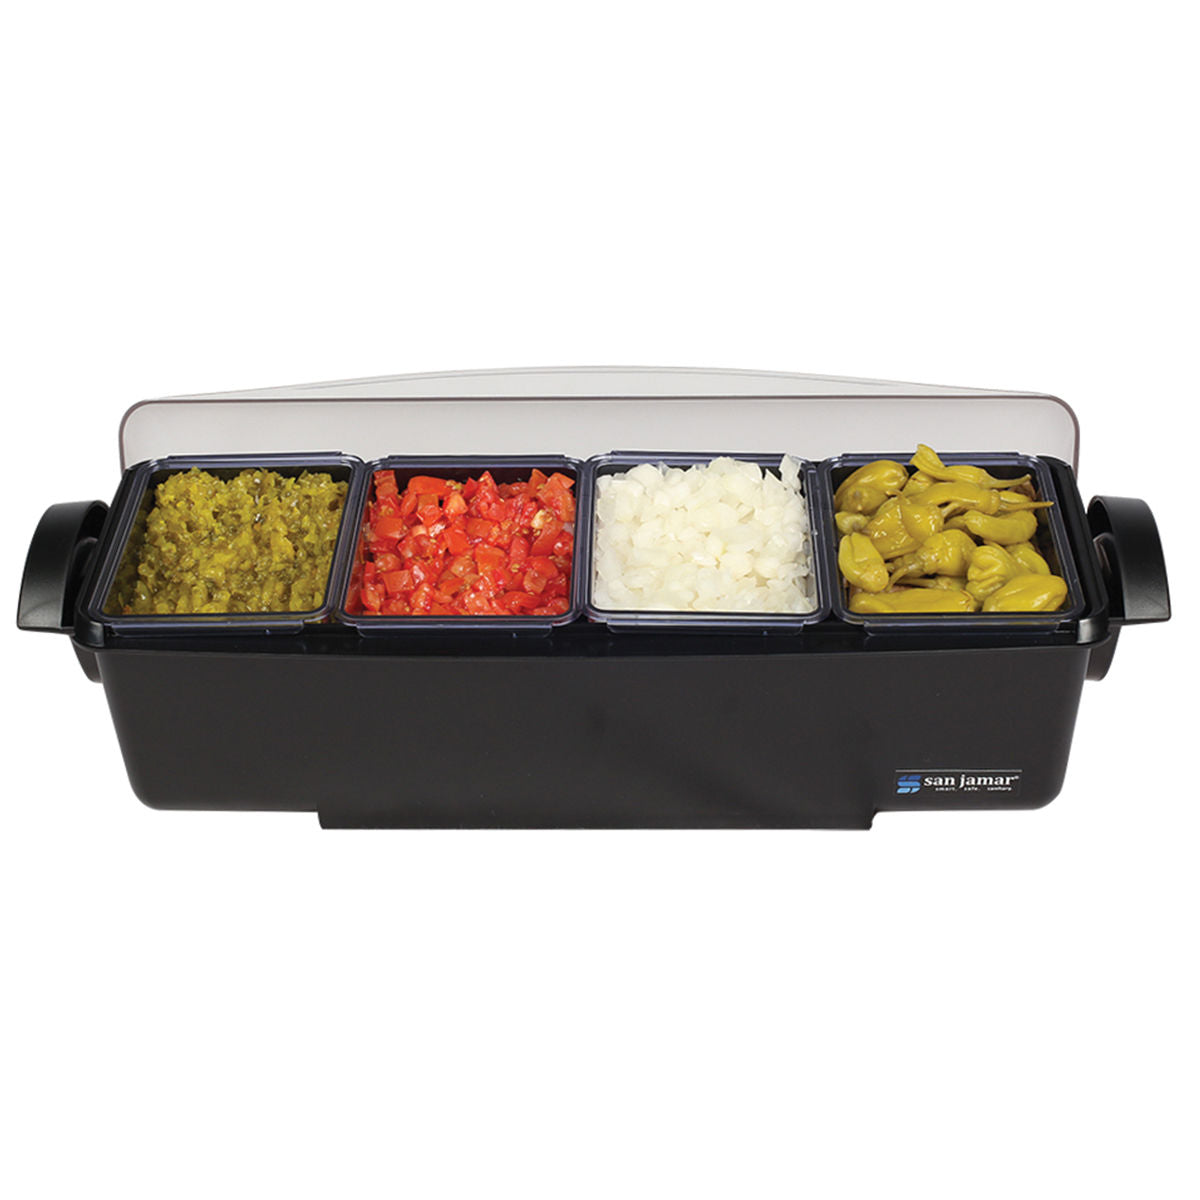 SAN JAMAR CONDIMENT AND GARNISH TRAY 4 COMPARTMENTS - Mabrook Hotel Supplies